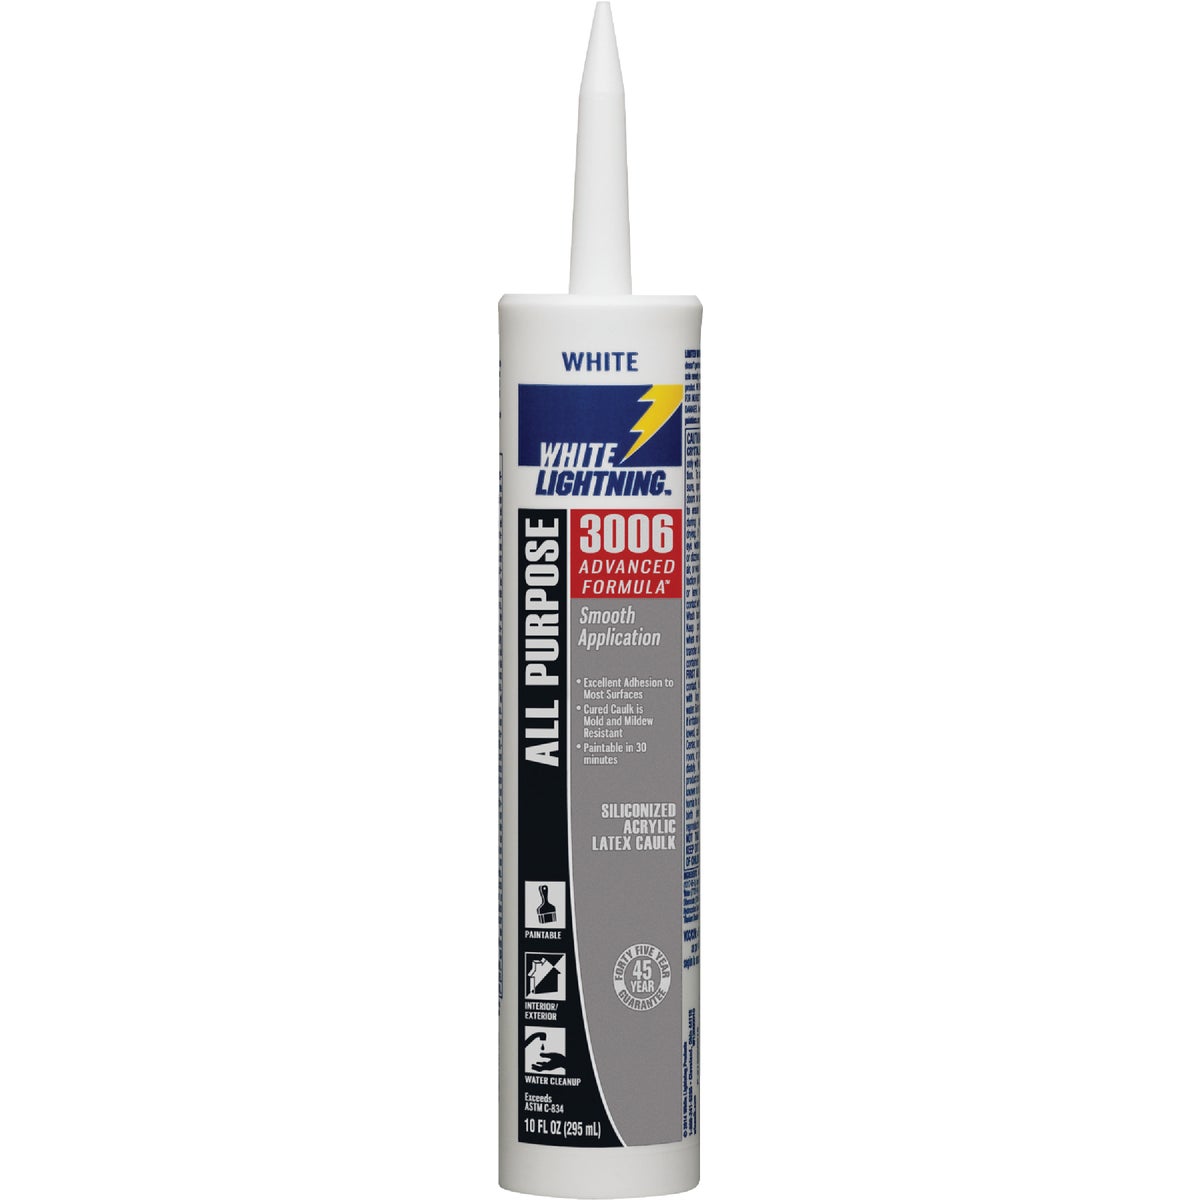 Item 776203, White Lightning 3006 Advanced Formula provides a smooth application that 